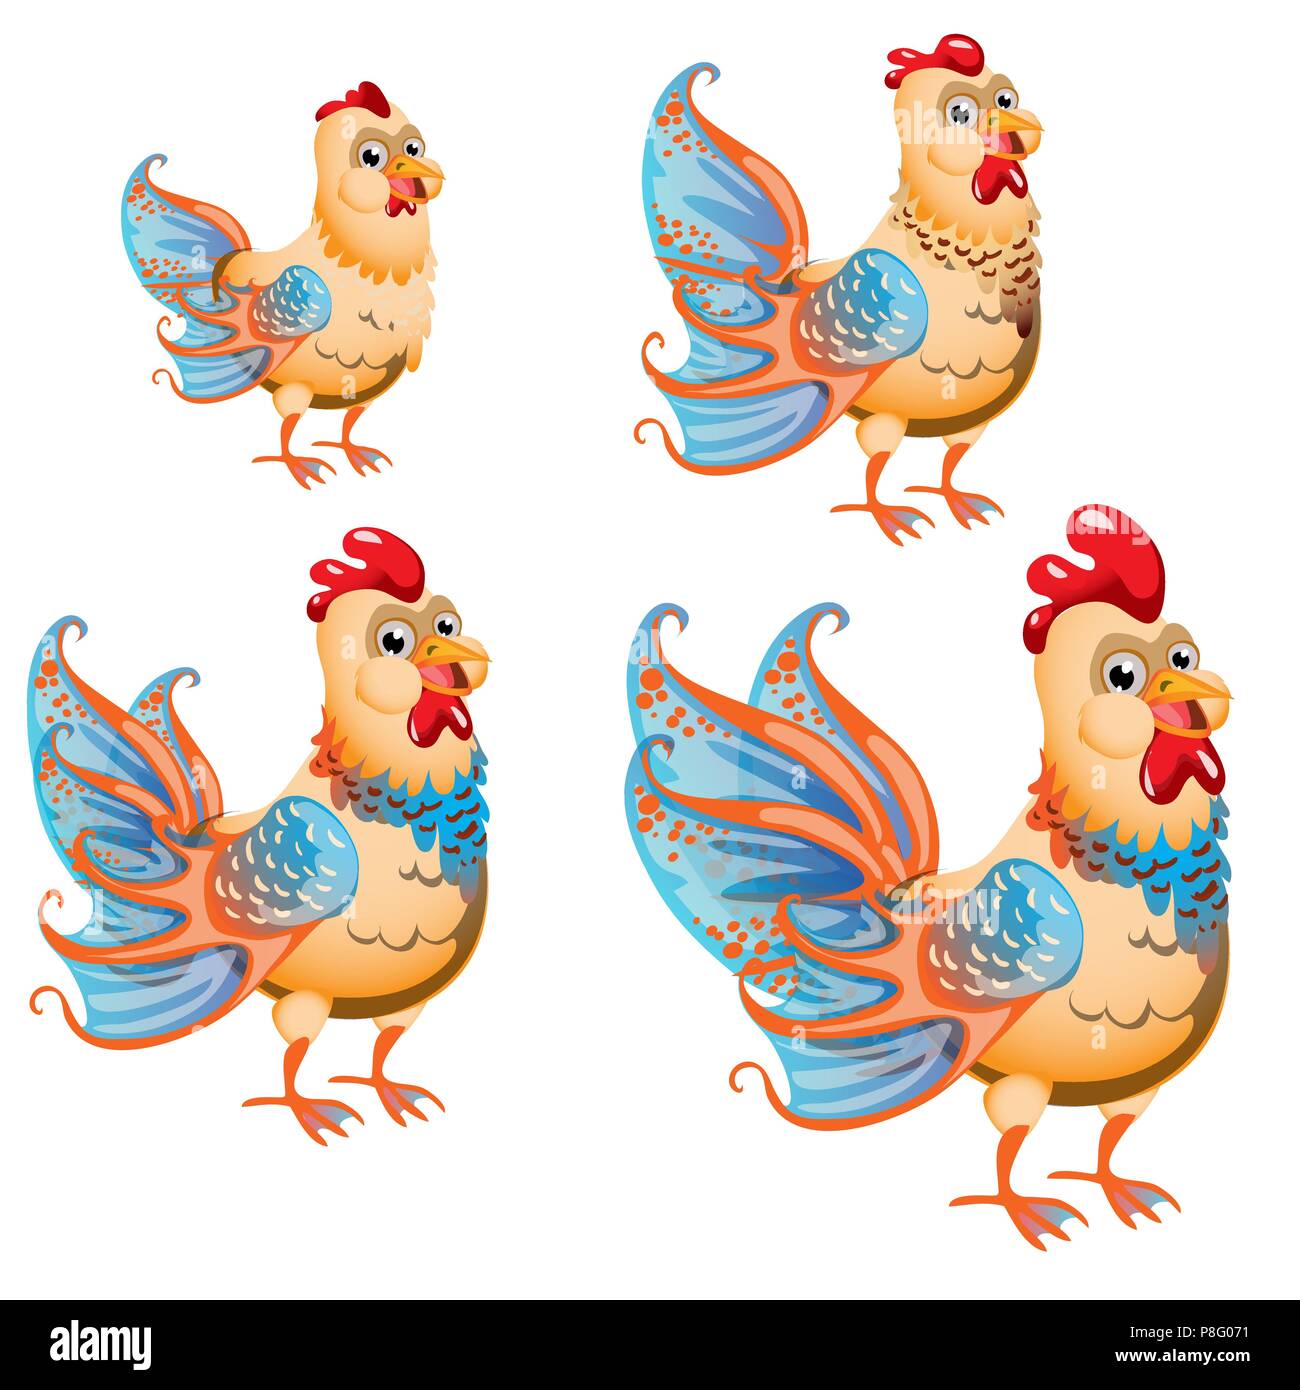 Set of fantasy animals isolated on white background. Hybrid fish and chicken. Vector illustration. Stock Vector